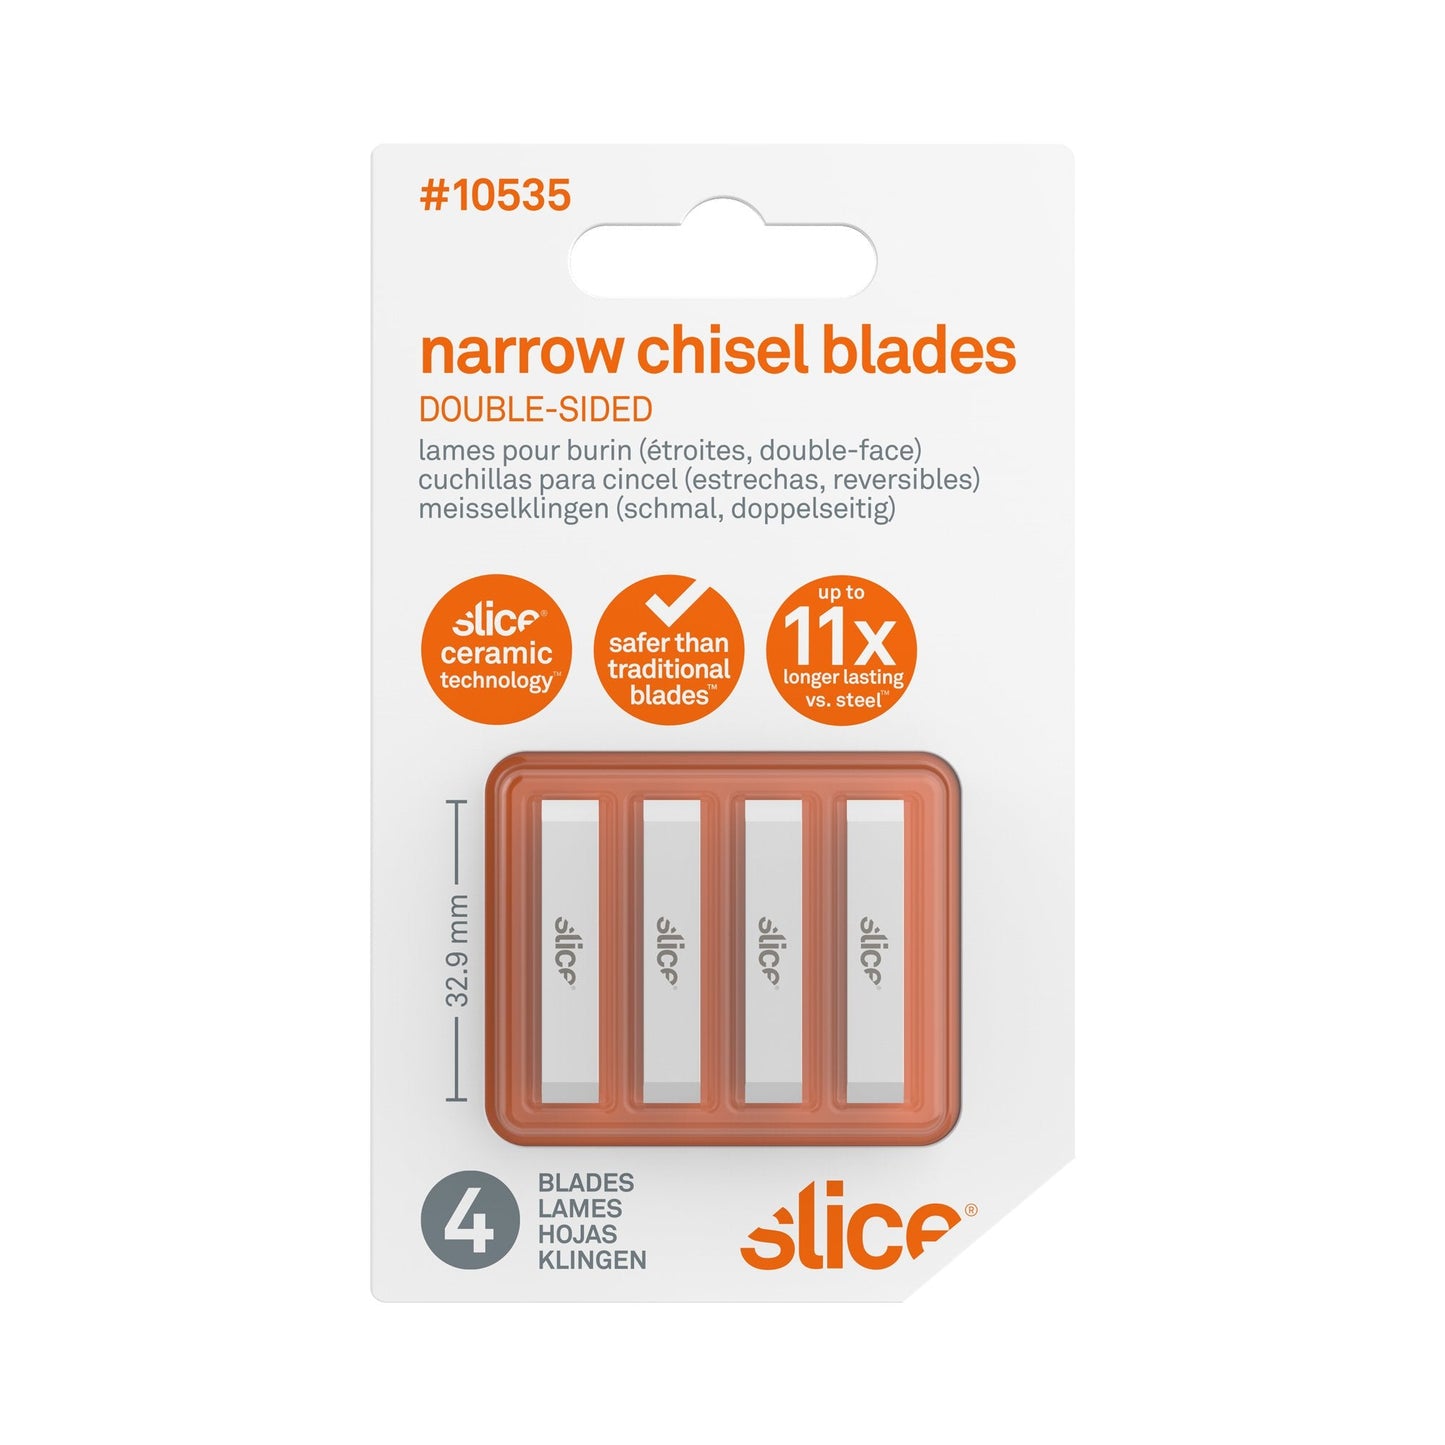 Chisel Blades (Narrow, Double-Sided)